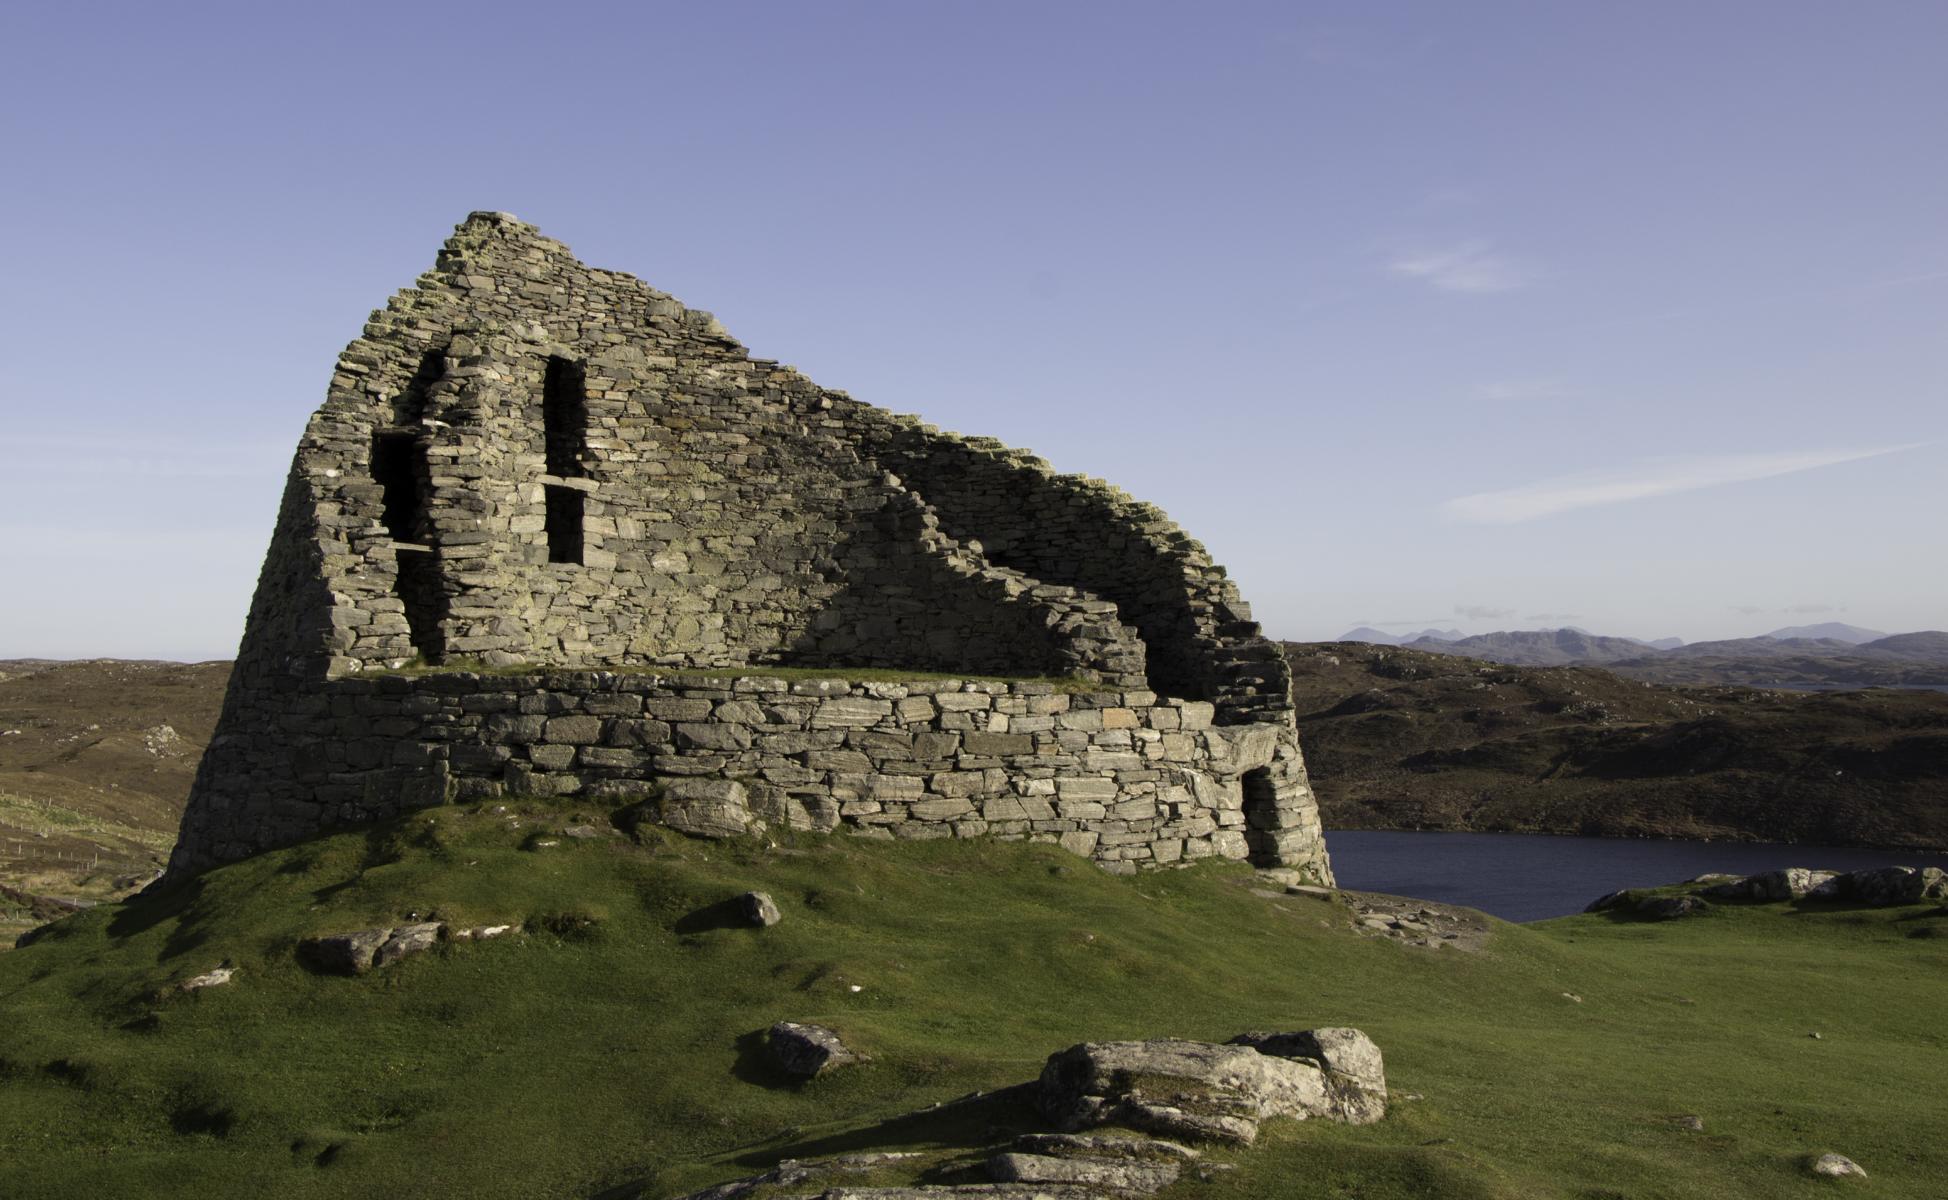 Typical Broch: Double walls, multiple floors, too narrow an entrance door for any sidecar.